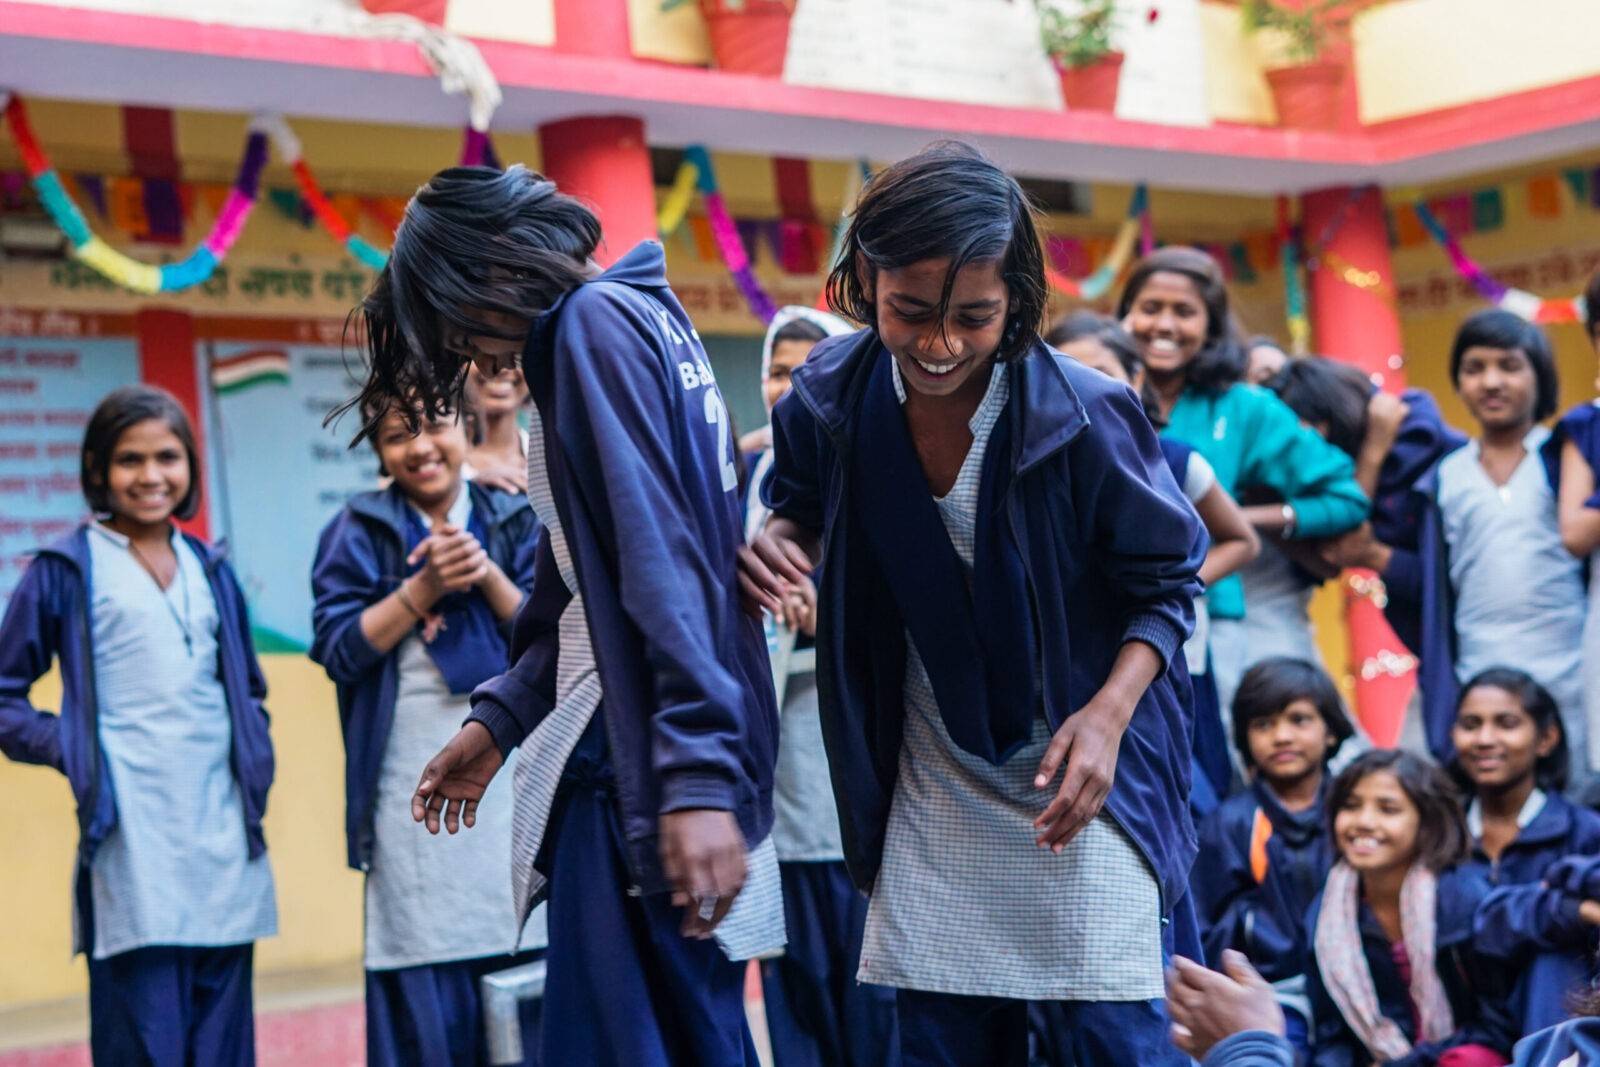 Rekha and Muskan have been best friends for five years. Their parents admitted them together in KGBV, Alirajpur so that they could take care of each other. The girls say that when they go back home during holidays, they tell their mothers everything they learn about menstruation